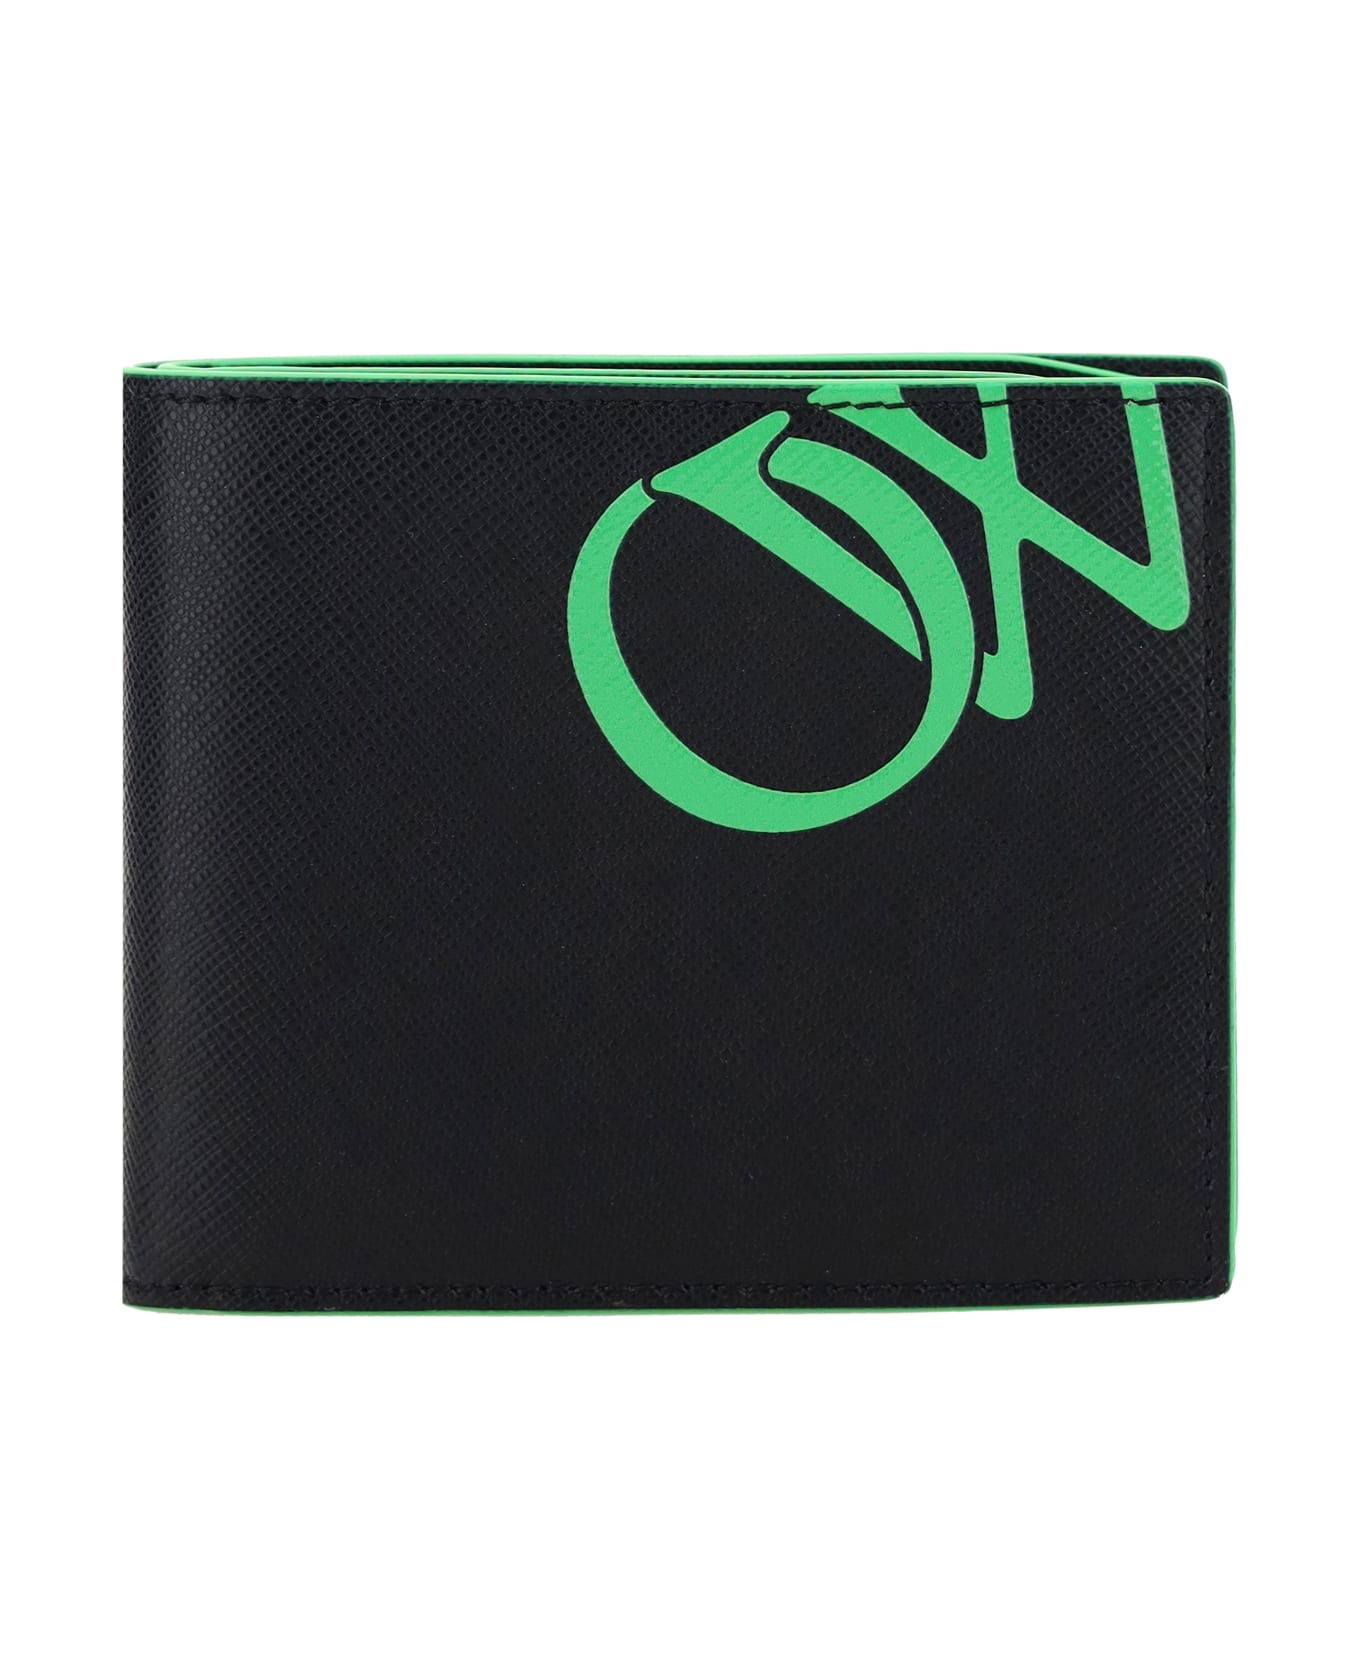 Off-White Wallet - Black Green Fluo 財布